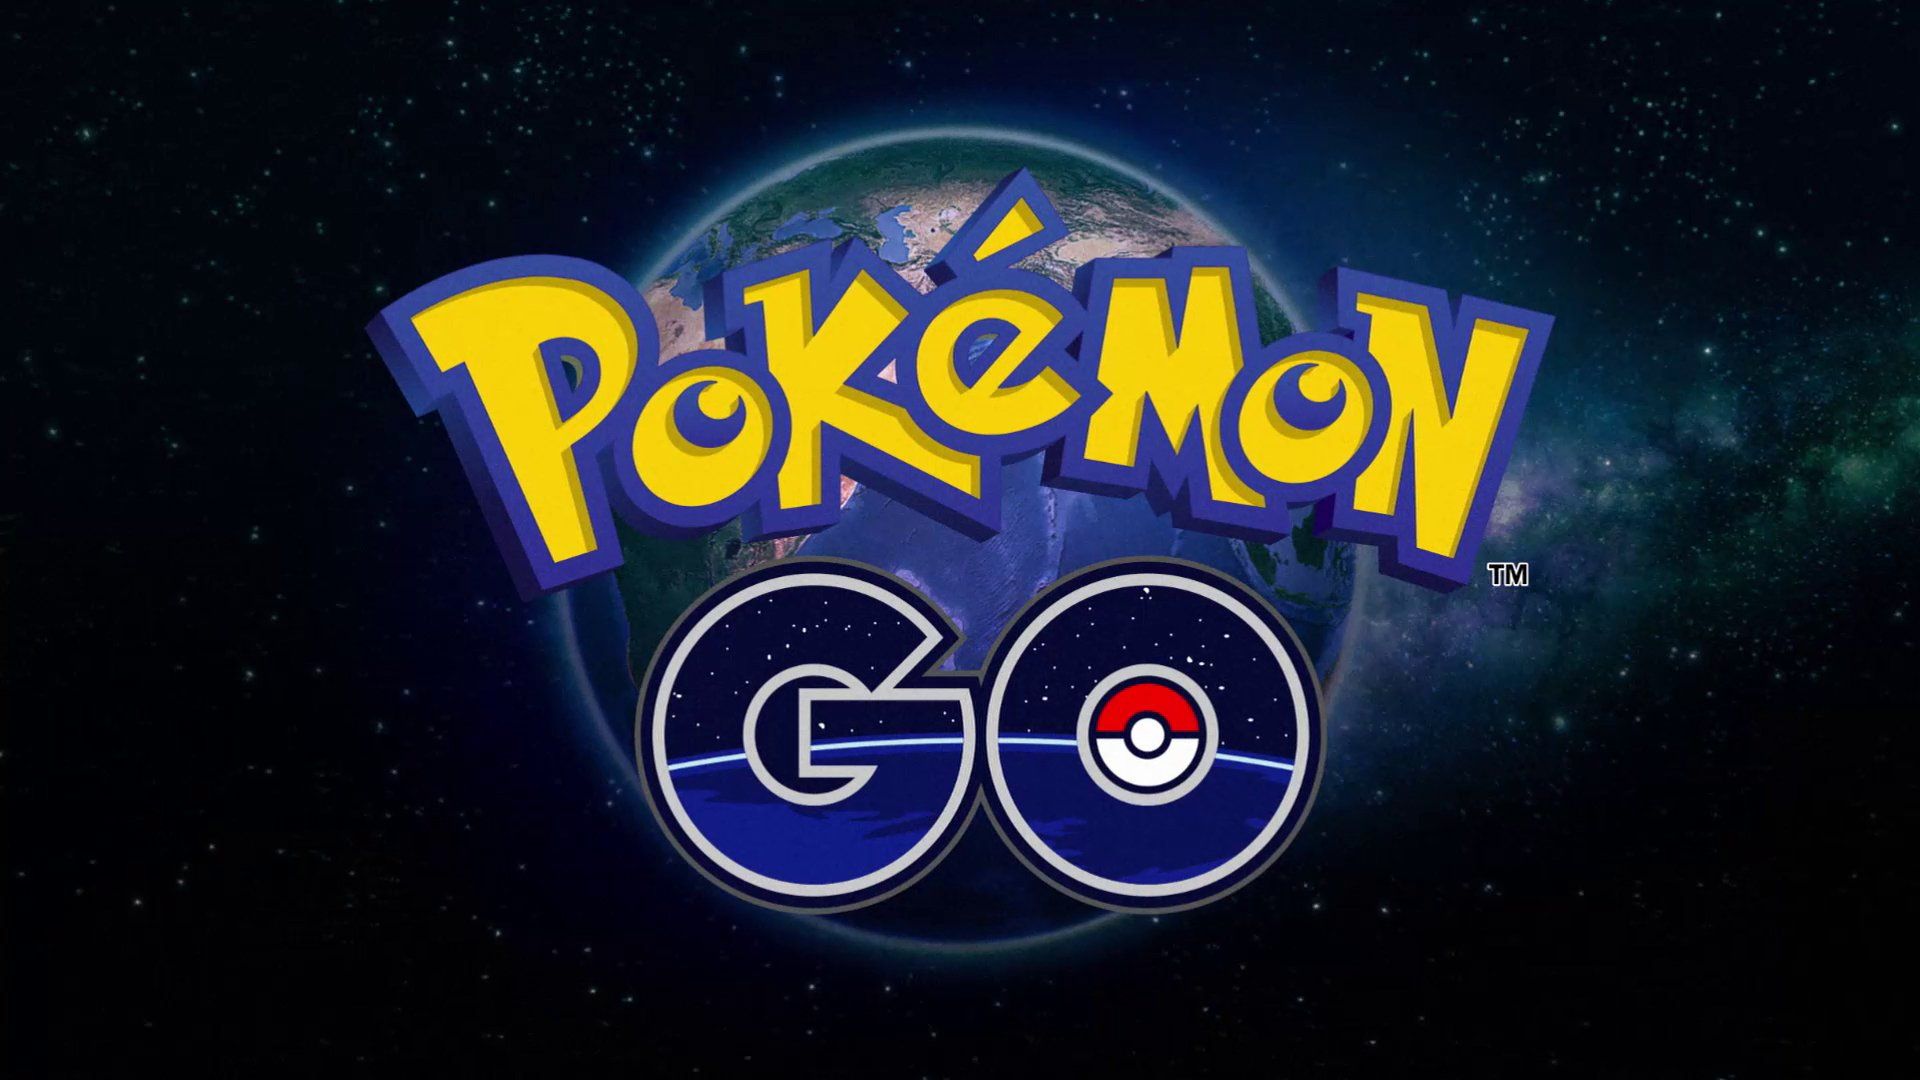 Pokémon GO: what they are for and how to get special items